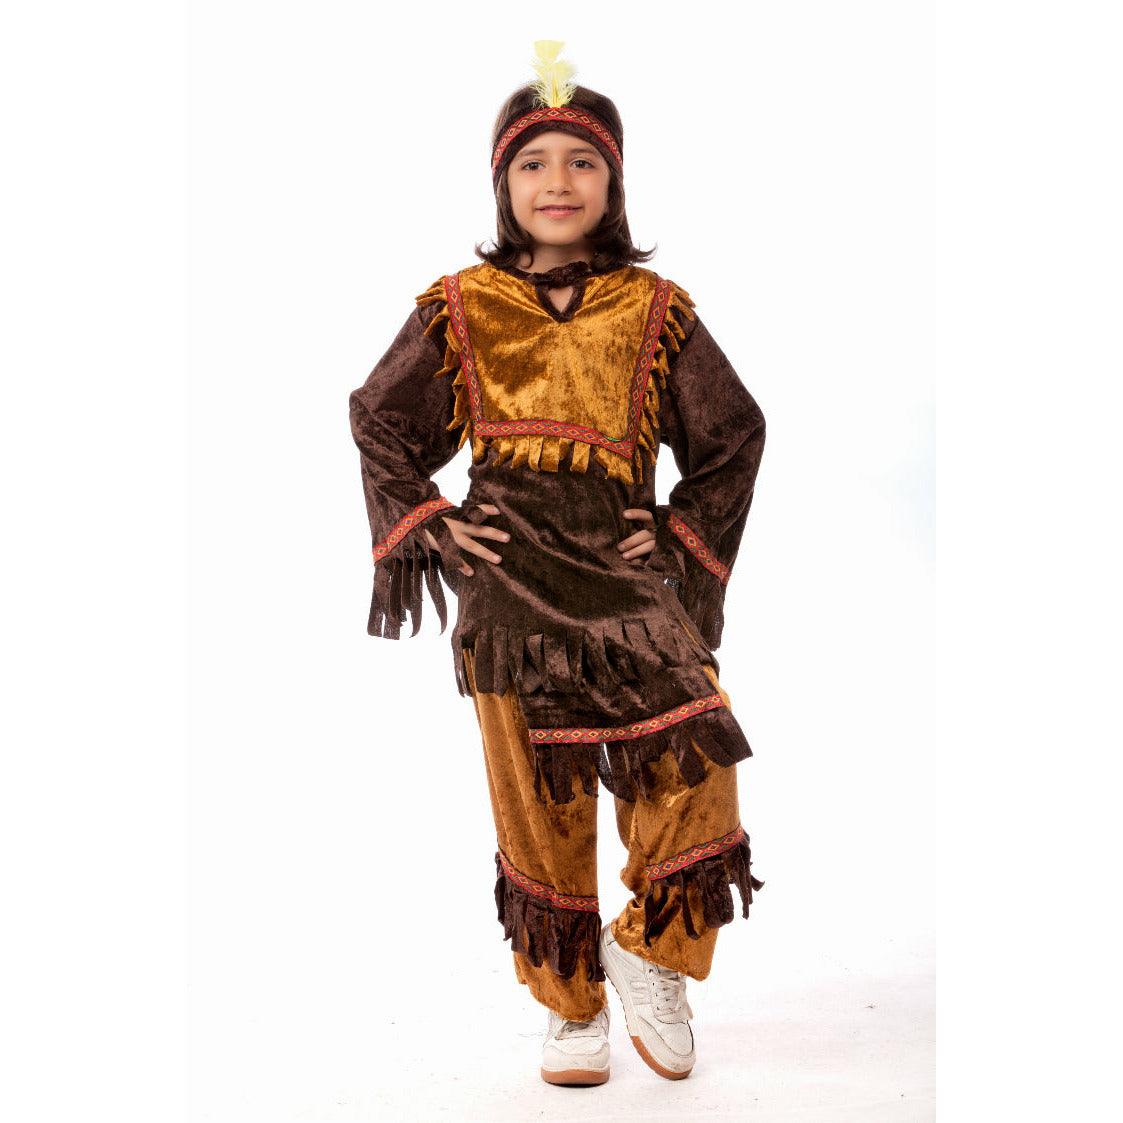 Red Indian Boy Costume - Ourkids - M&A